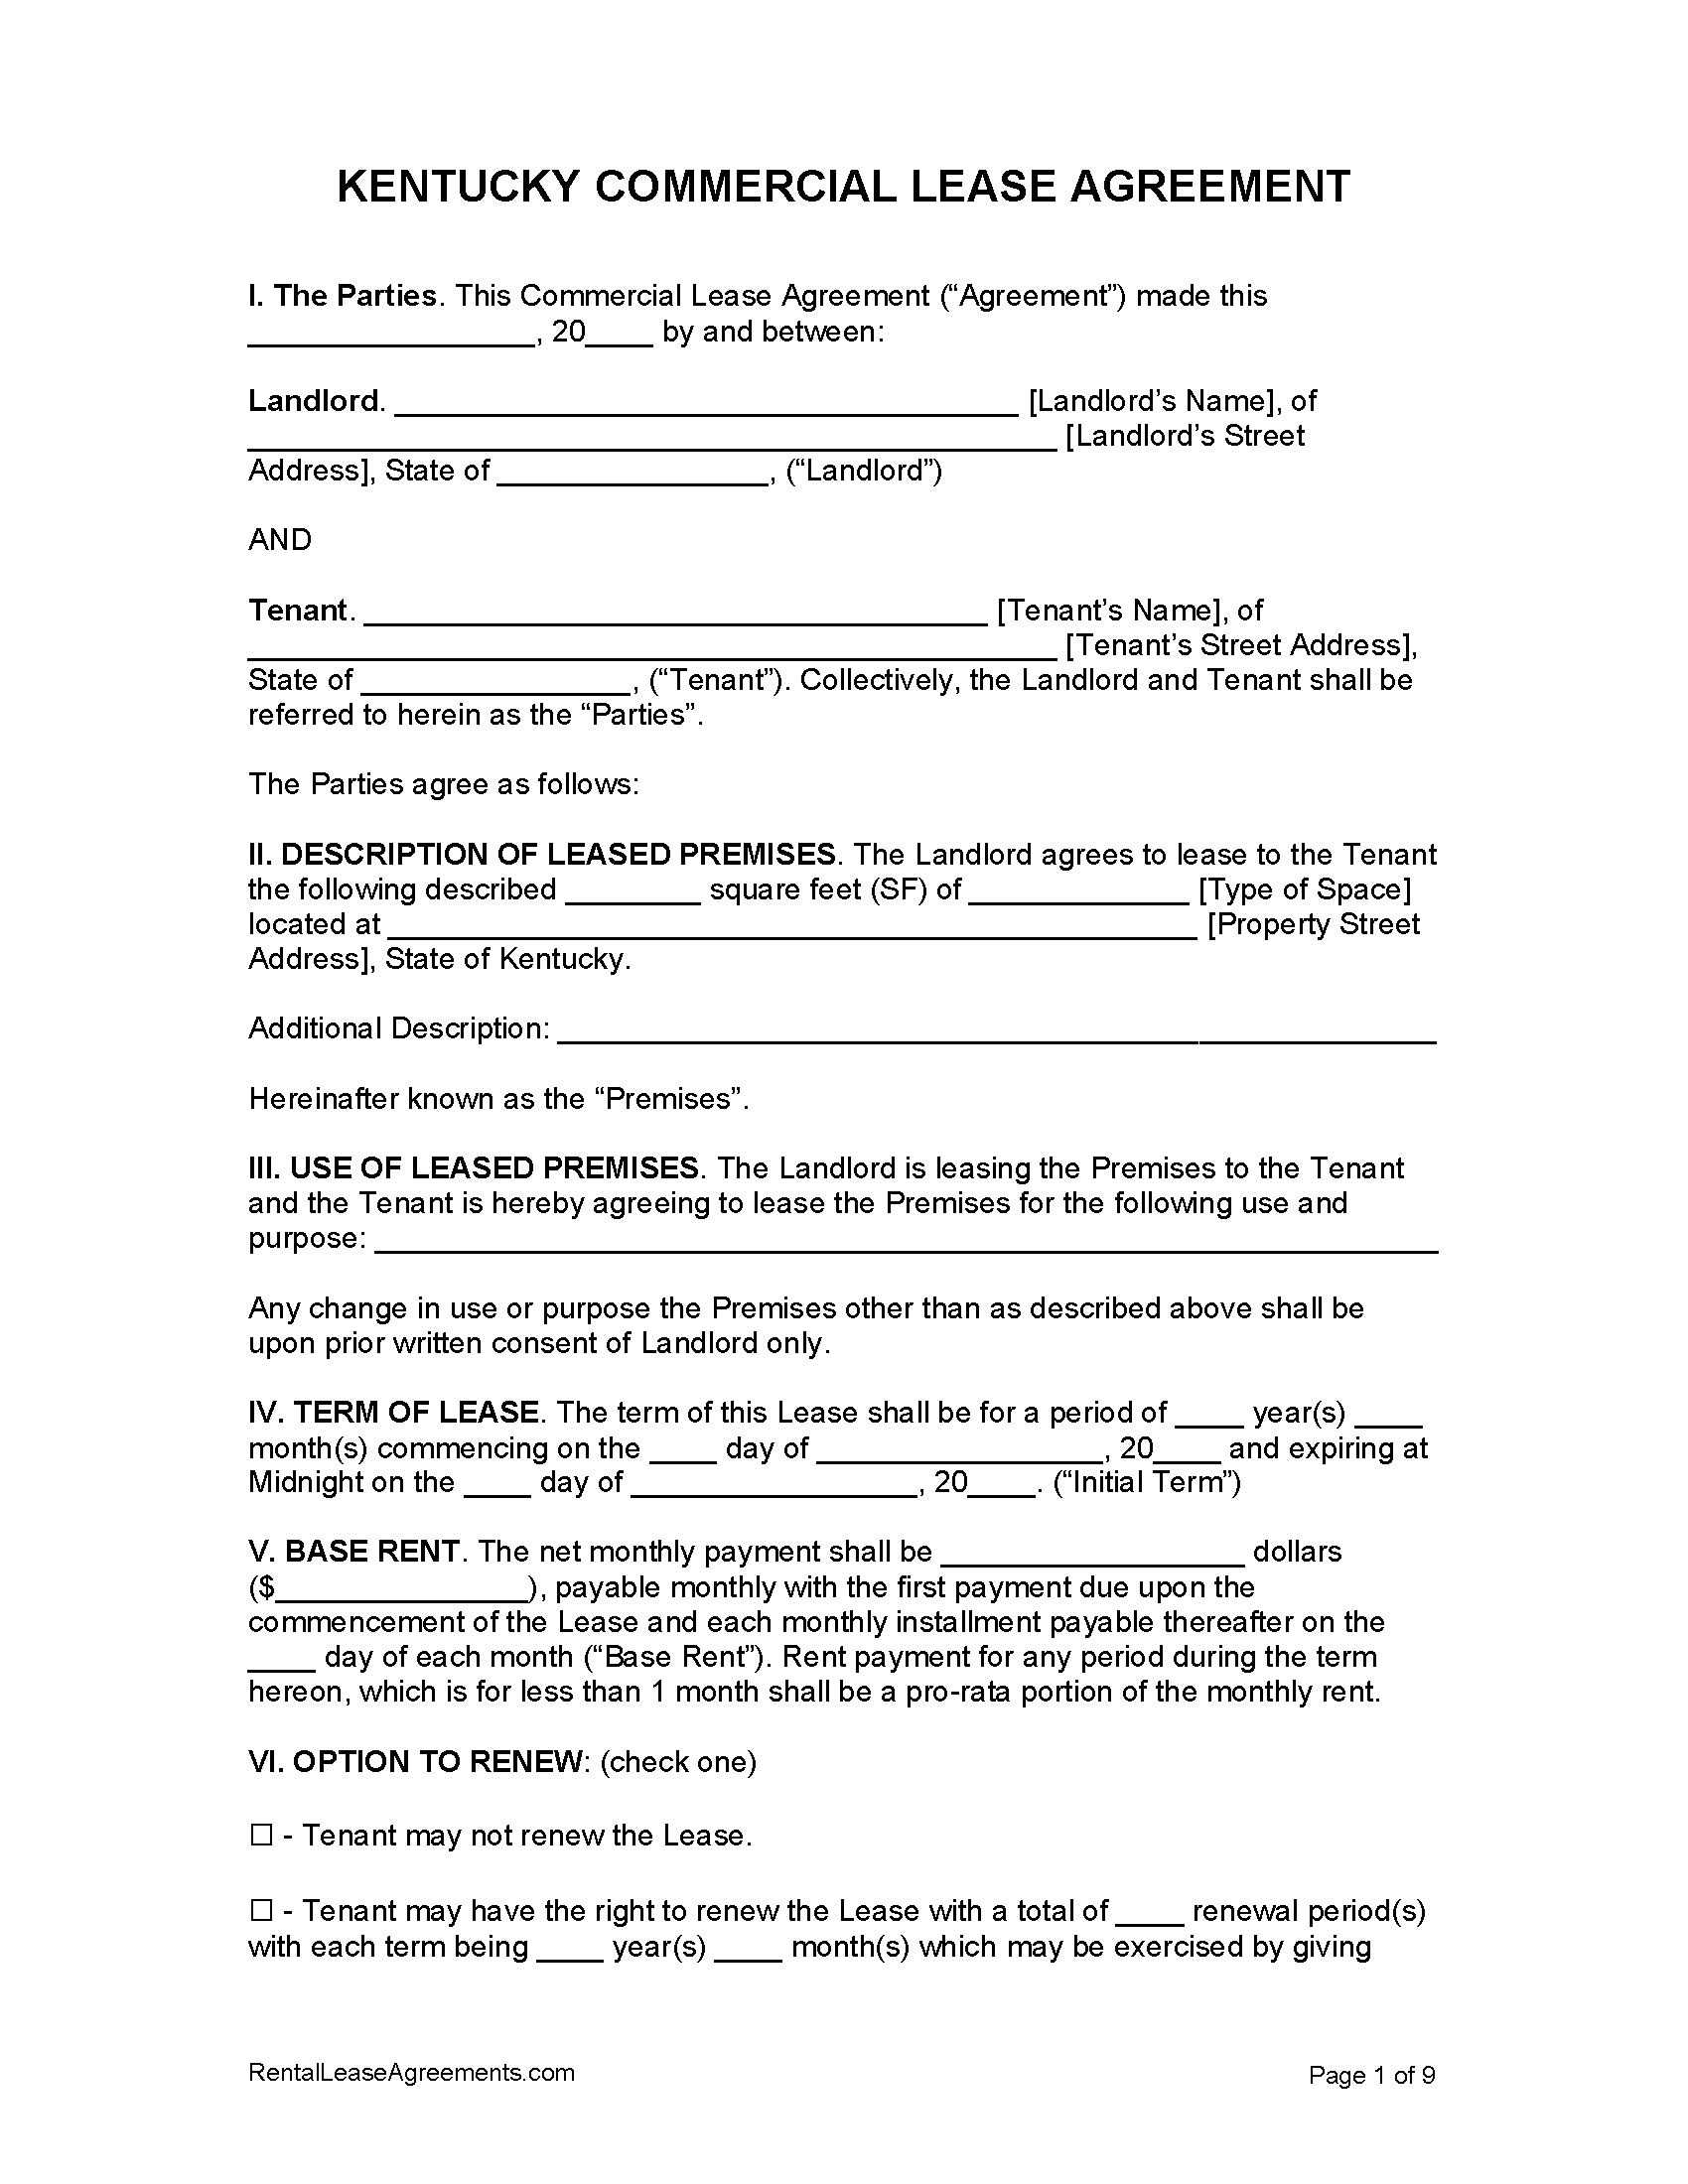 free-kentucky-commercial-lease-agreement-pdf-ms-word